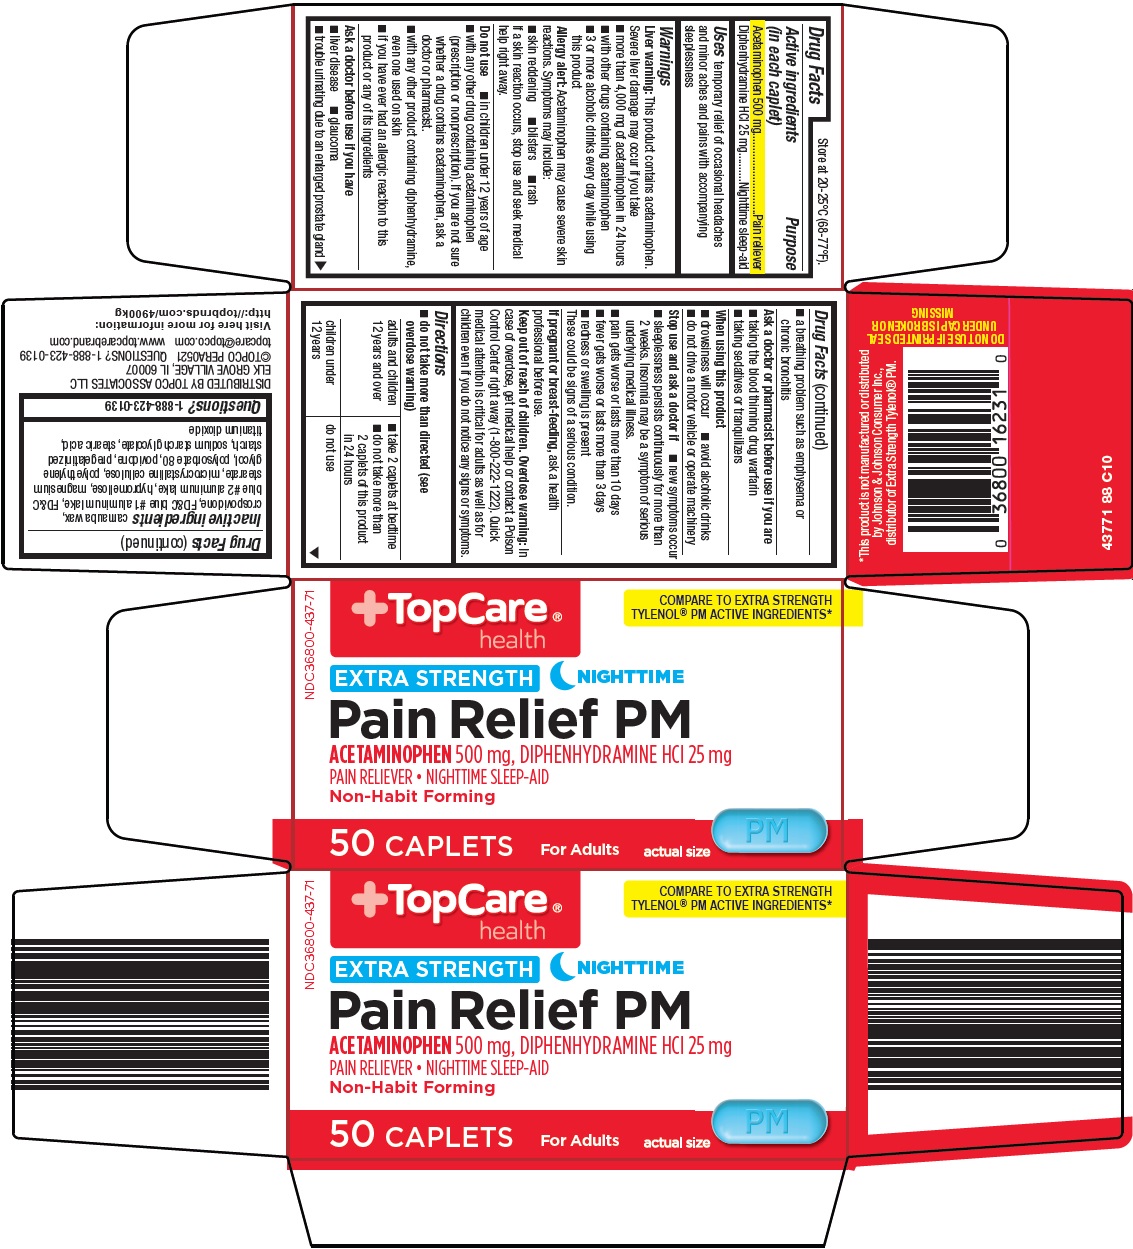 437-88-pain-relief-pm